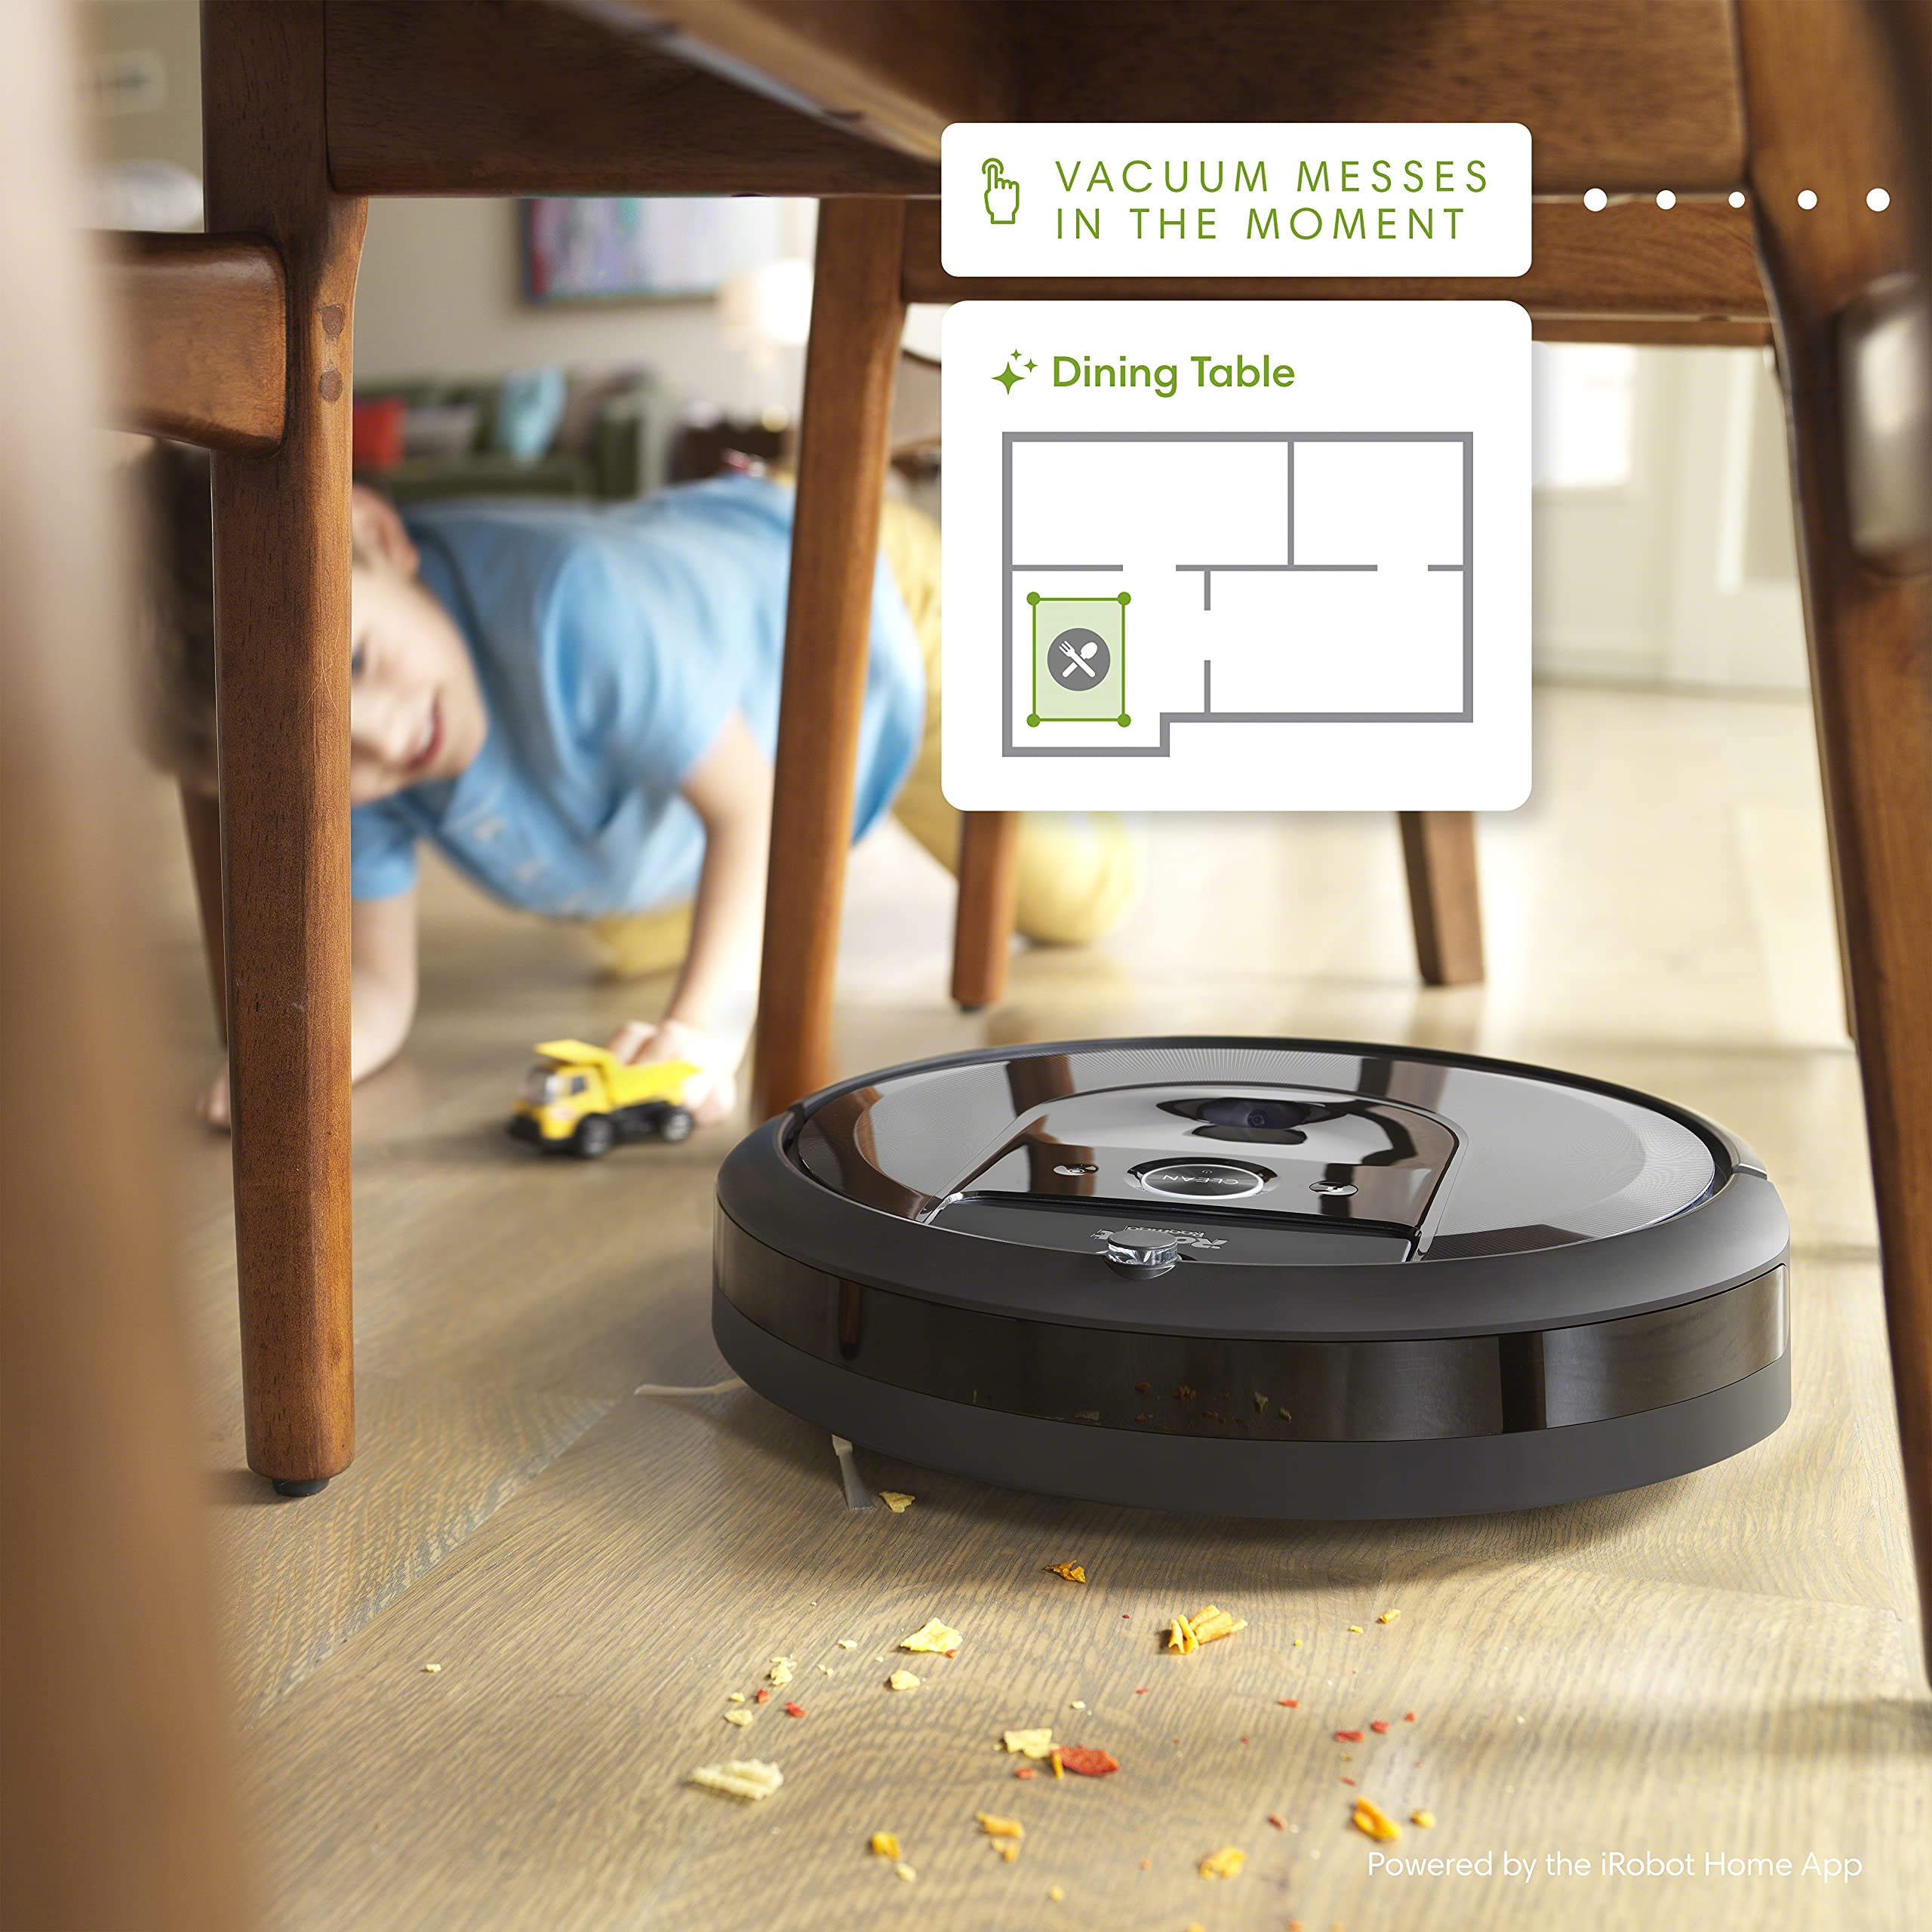 iRobot Roomba i7 (7150) Robot Vacuum- Wi-Fi Connected, Smart Mapping, Works with Alexa, Ideal for Pet Hair, Works With Clean Base, Black (7928583422190)